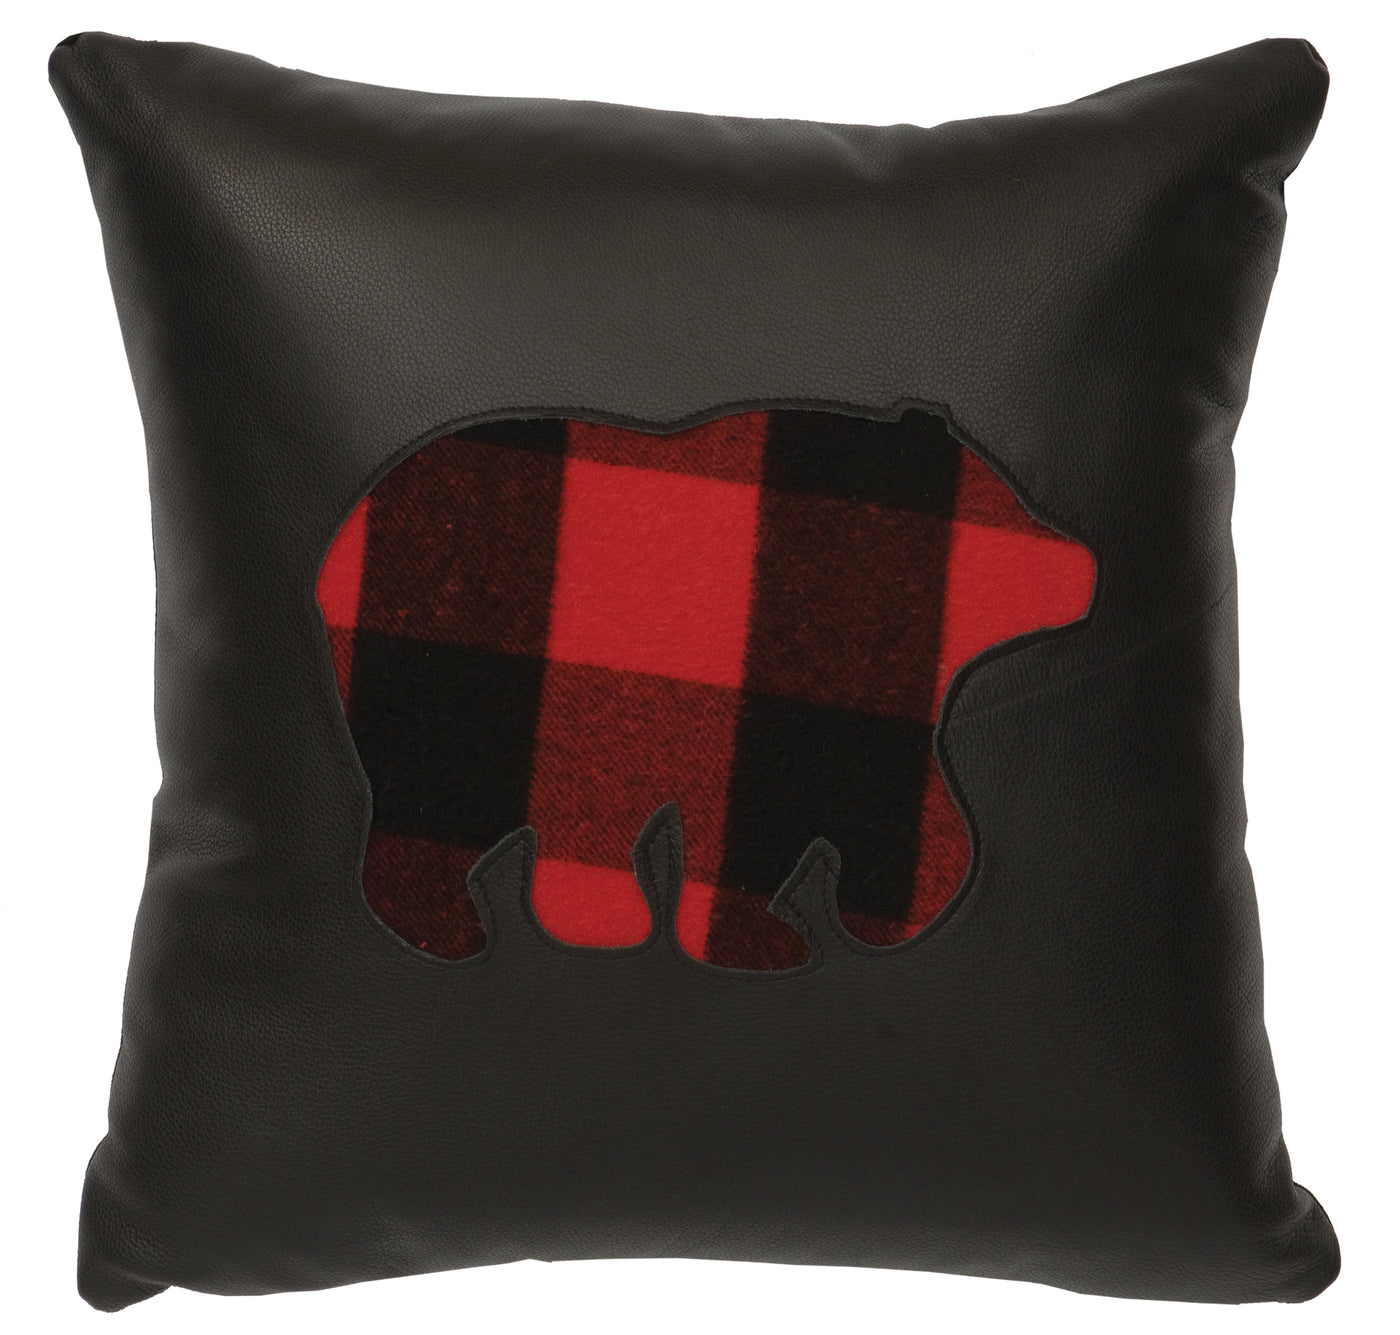 Canvello Black Leather Pillow - Fabric Back - 18"x18"